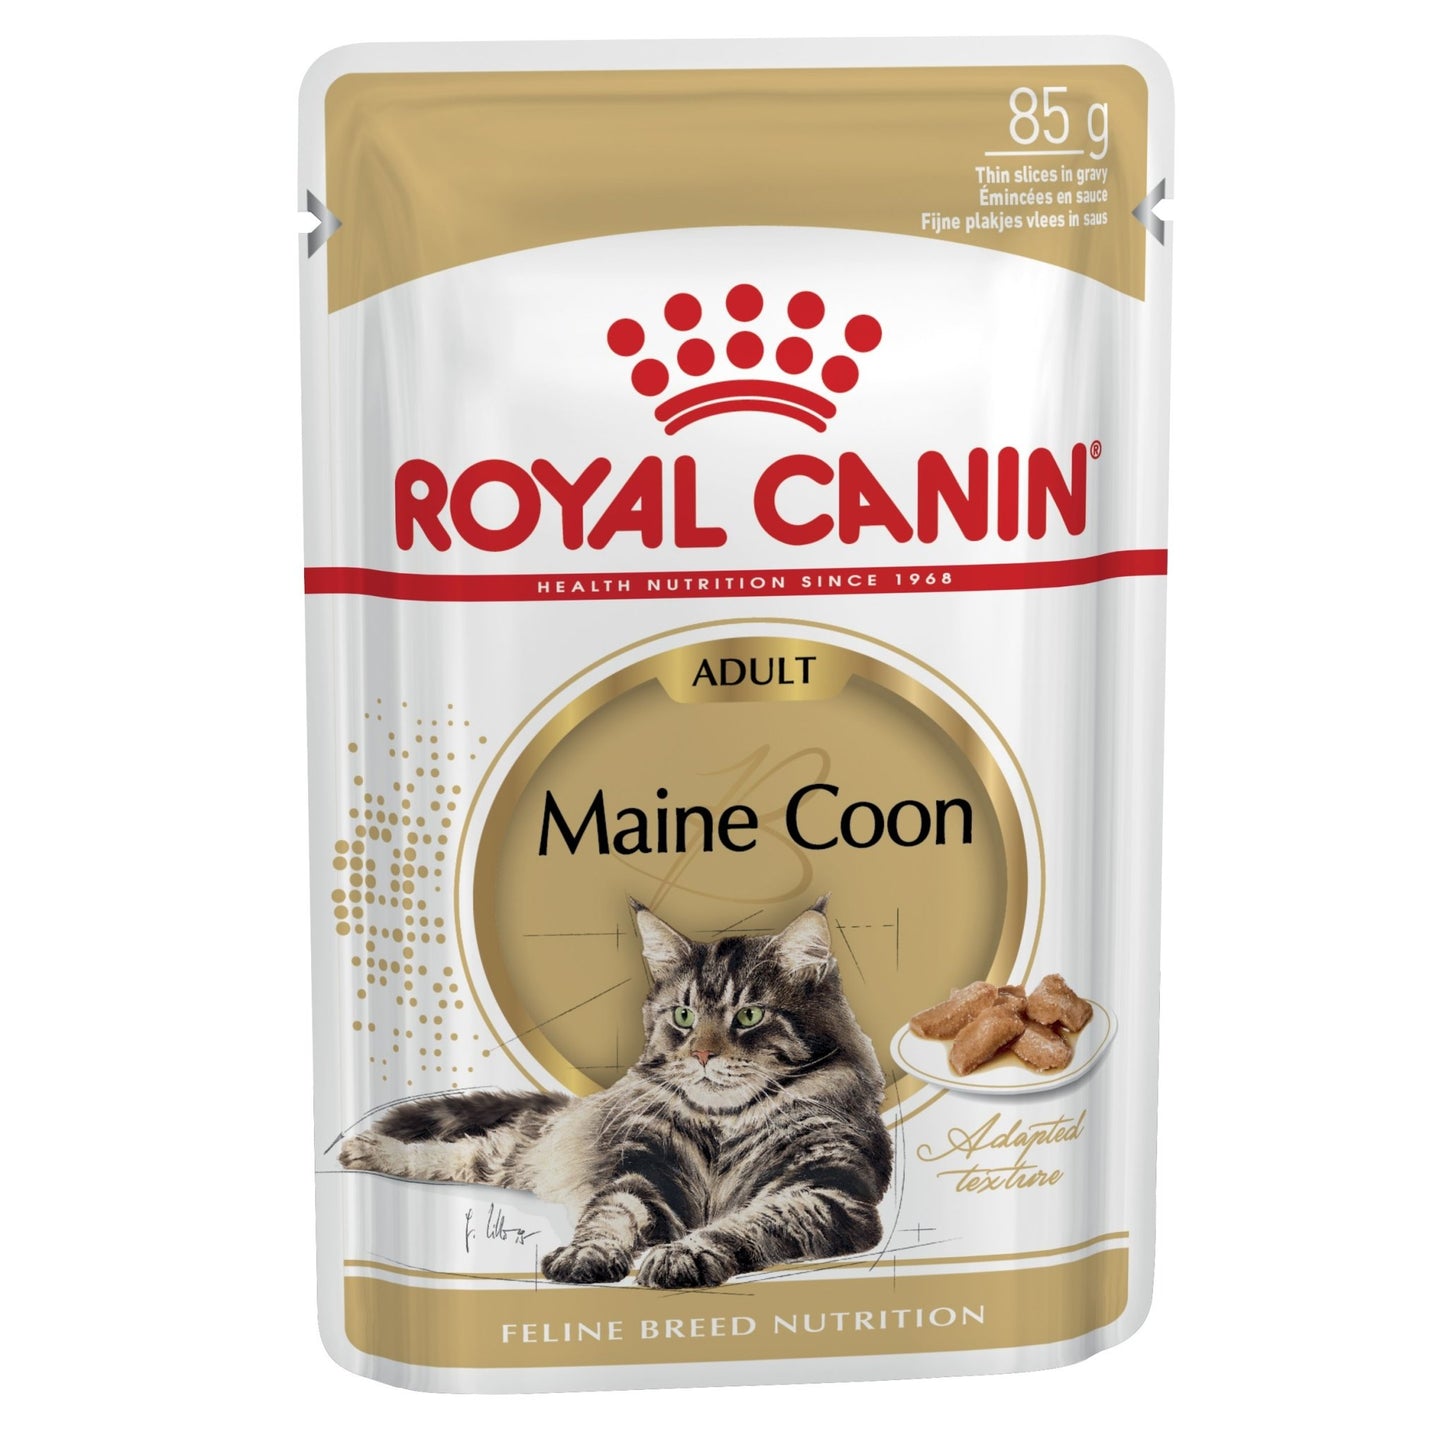 Royal Canin Cat Wet Food Pouch Maine Coon 85g - Woonona Petfood & Produce